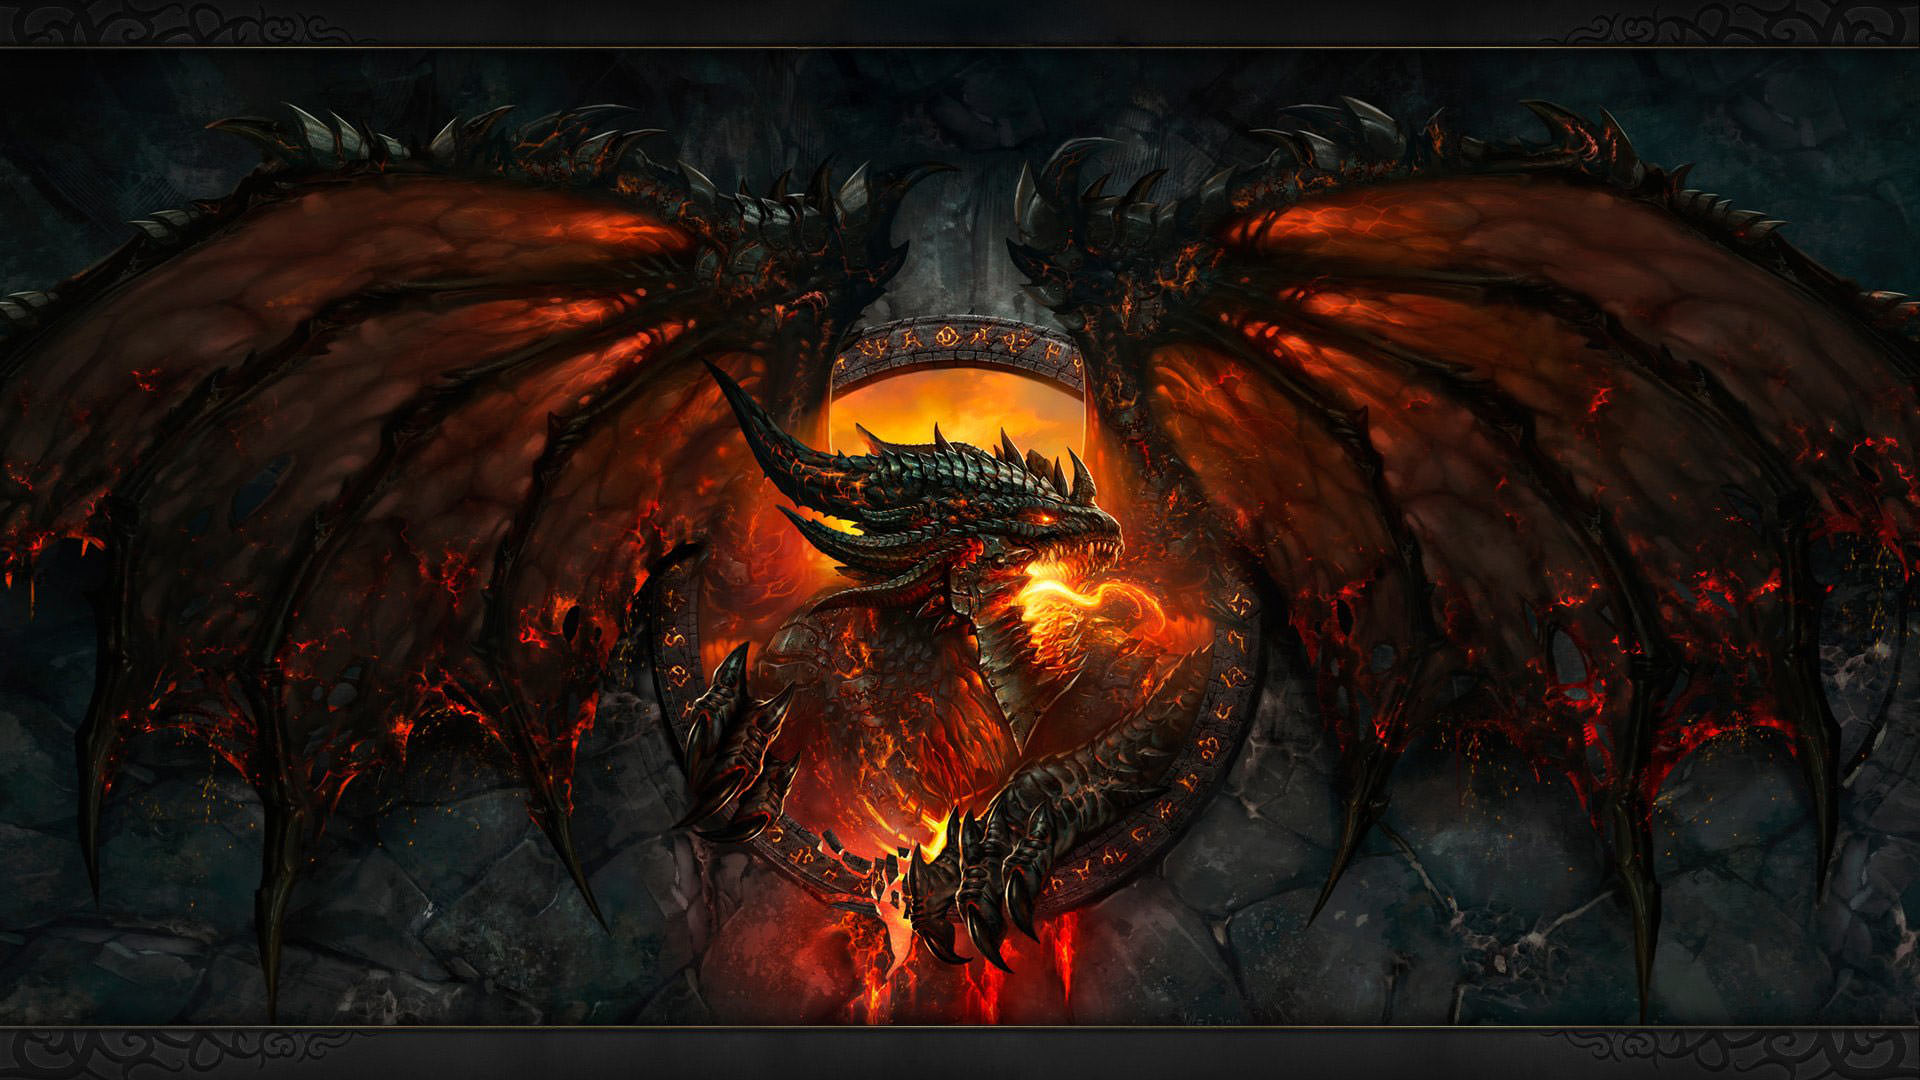 The main dragon of the game World of Warcraft: Cataclysm